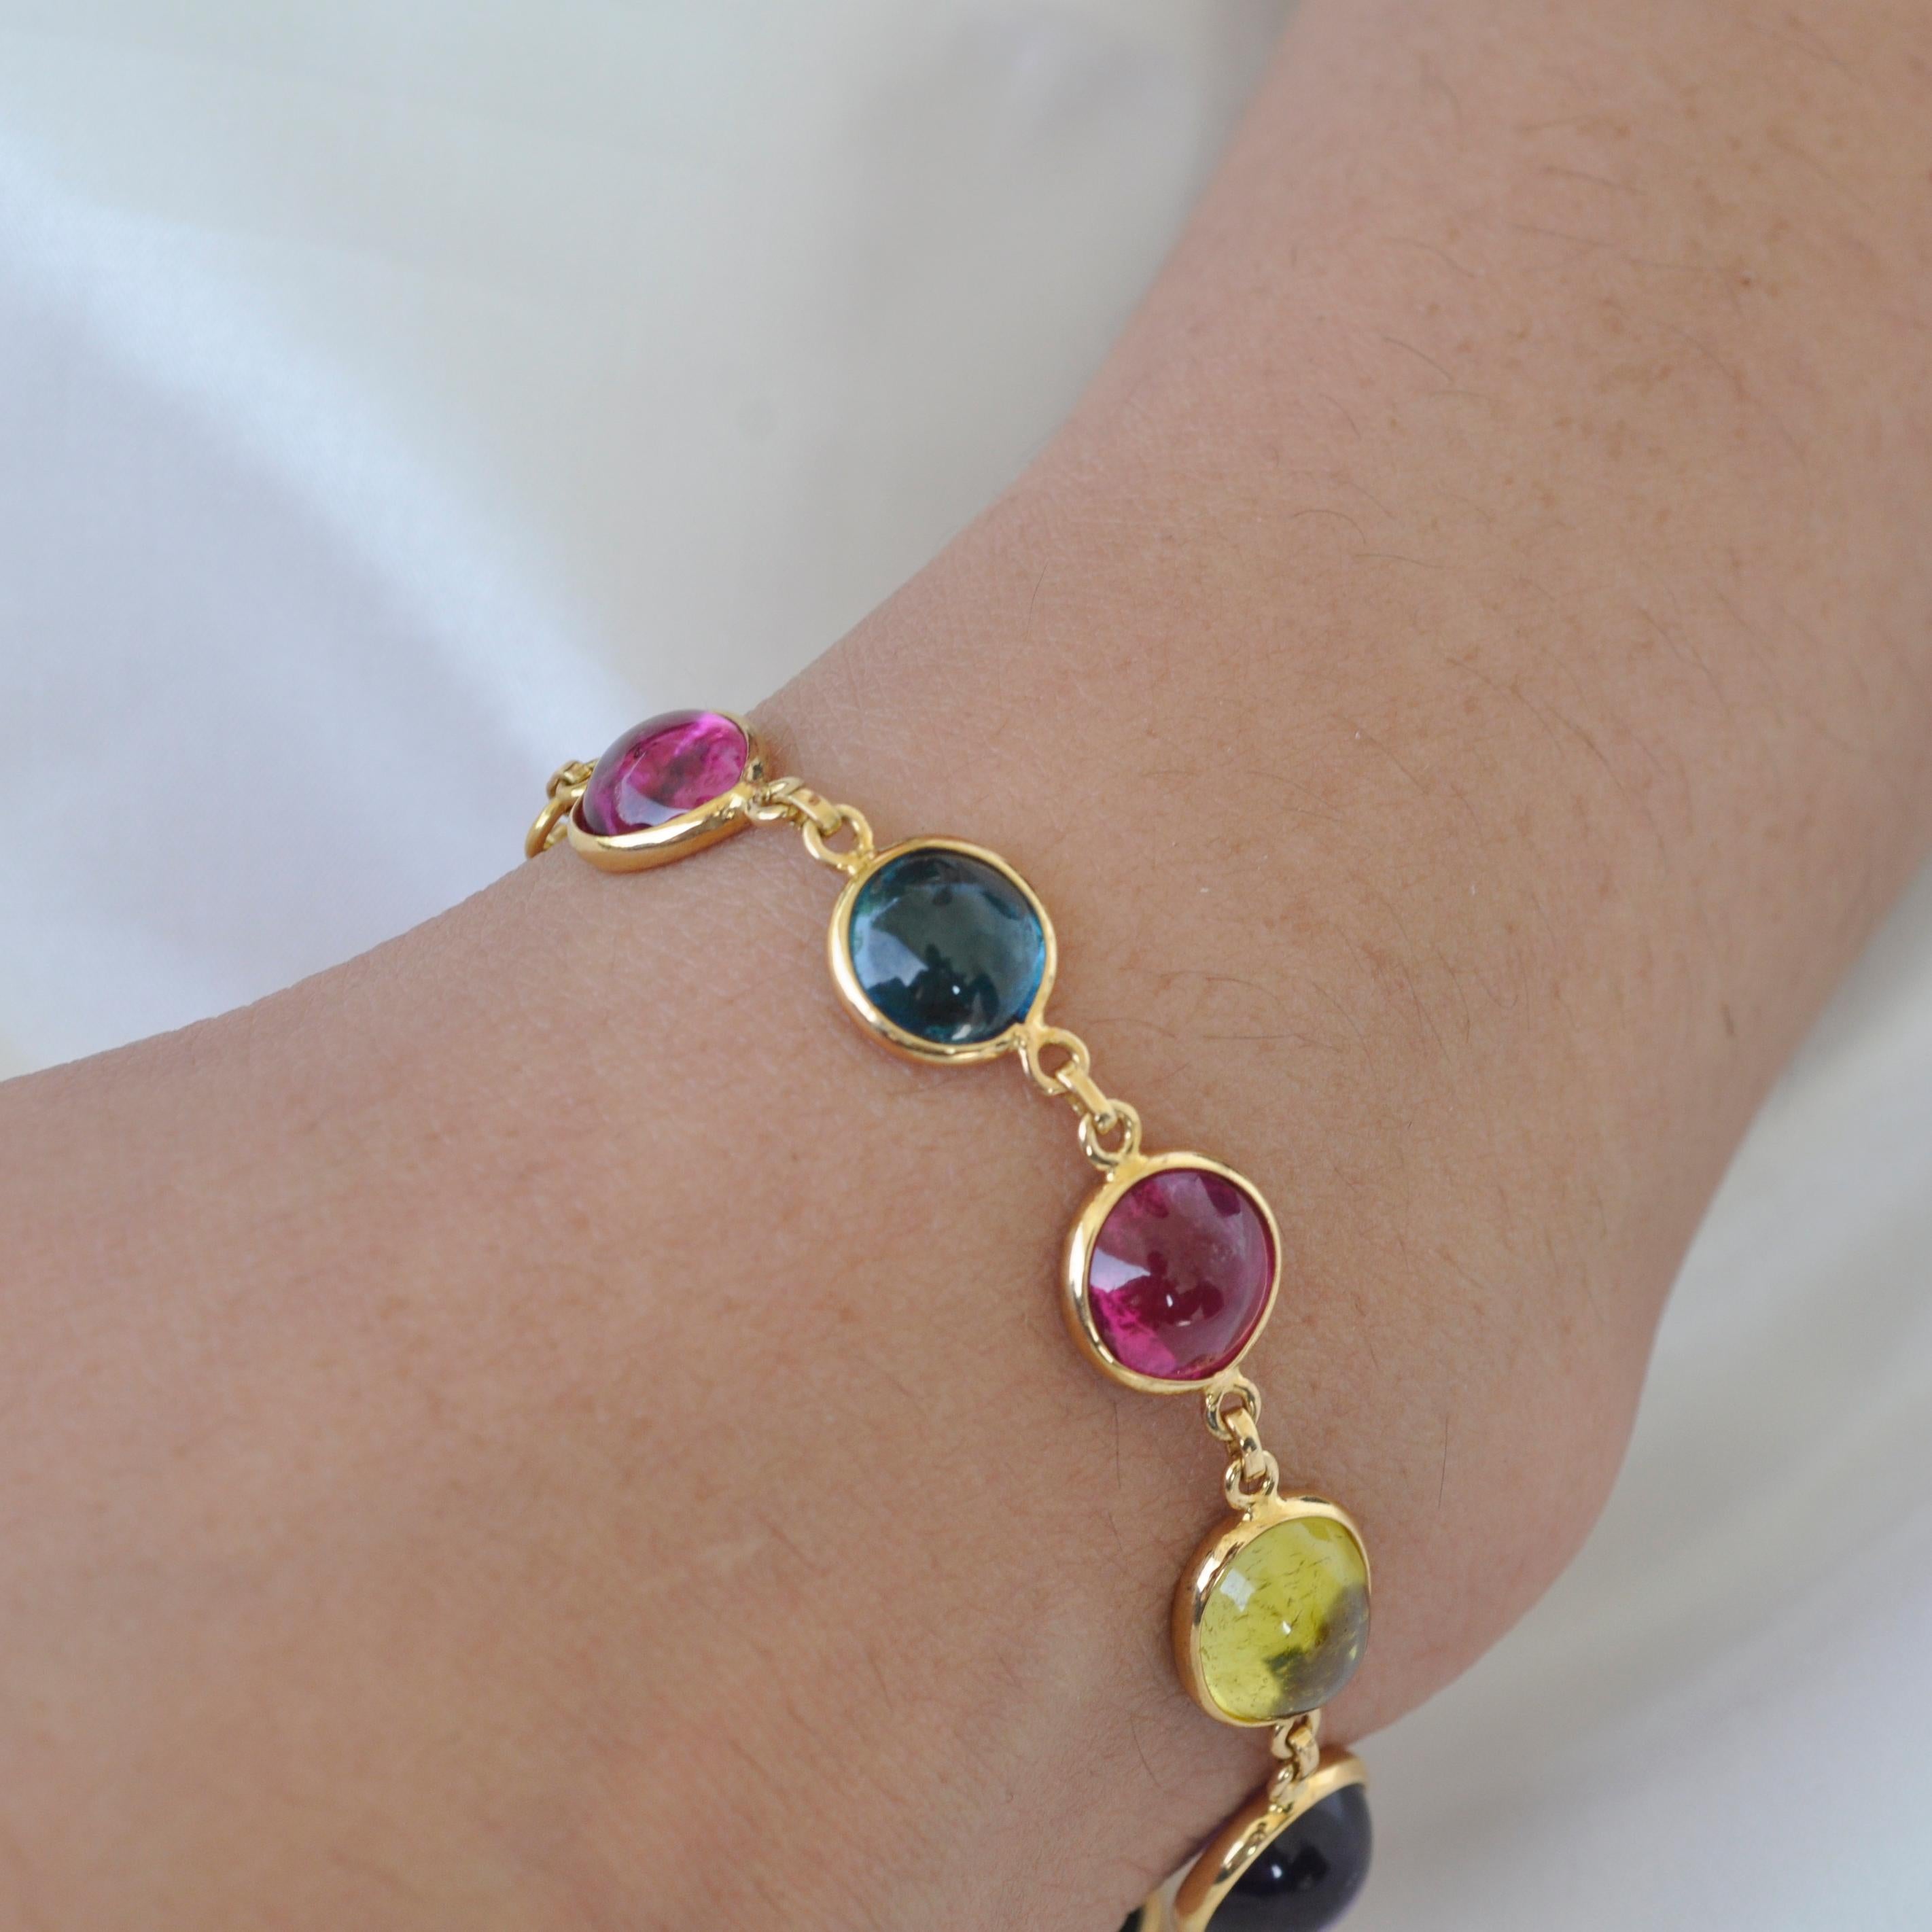 Celebrate colors.... Don't keep this bracelet in your locker box - these are meant to be worn!!! This colorful multi-color tourmaline, citrine and amethyst bracelet in 18k yellow gold with 20.06 cts of natural multi-color gemstones. And with all